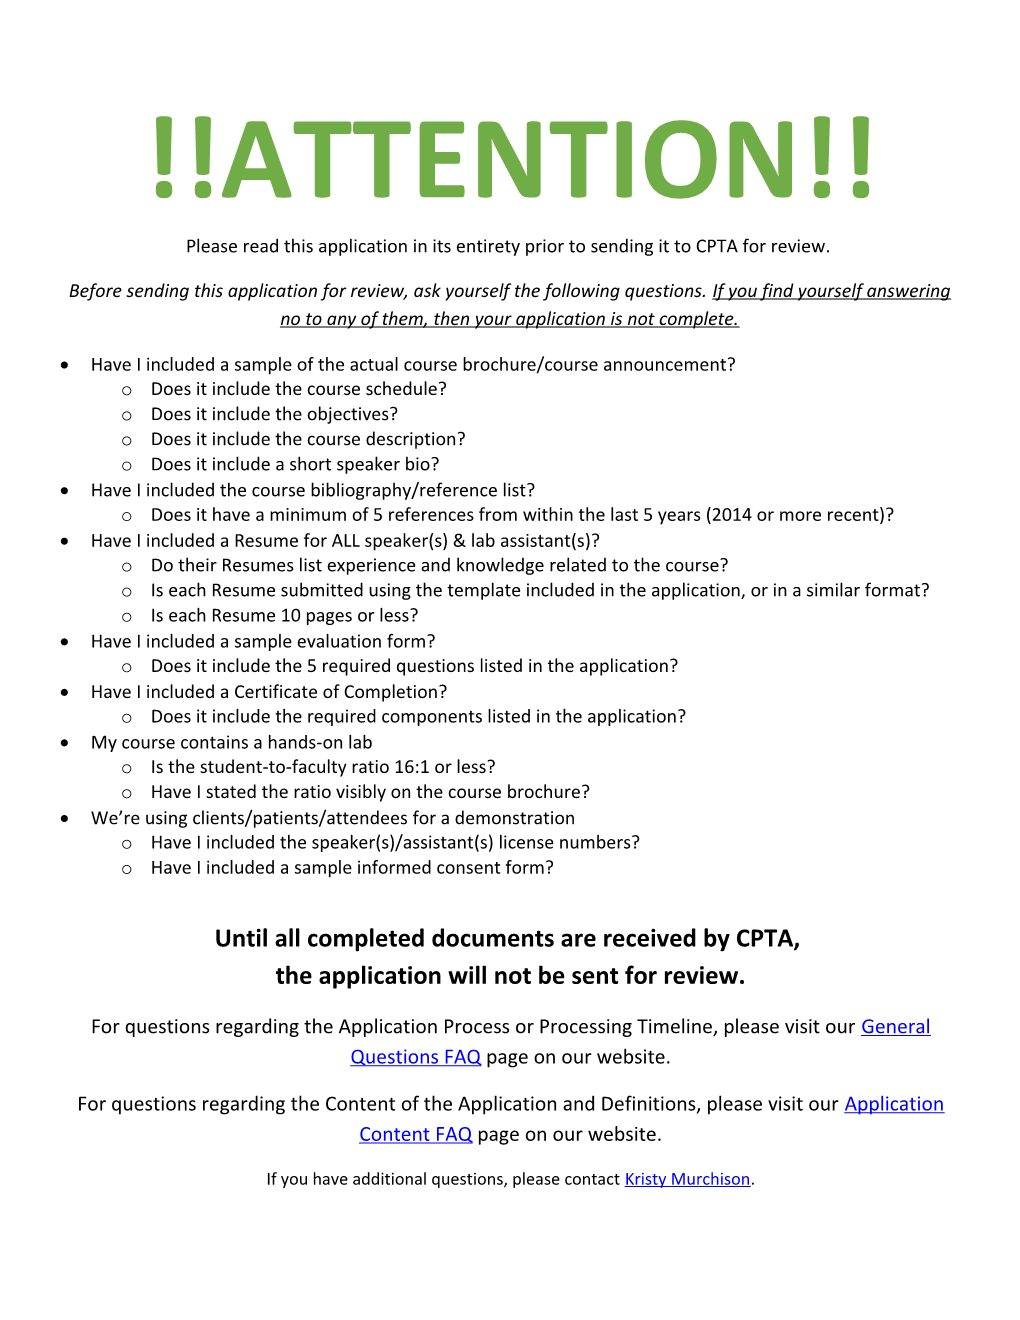 ATTENTION Please Read This Application in Its Entirety Prior to Sending It to CPTA for Review